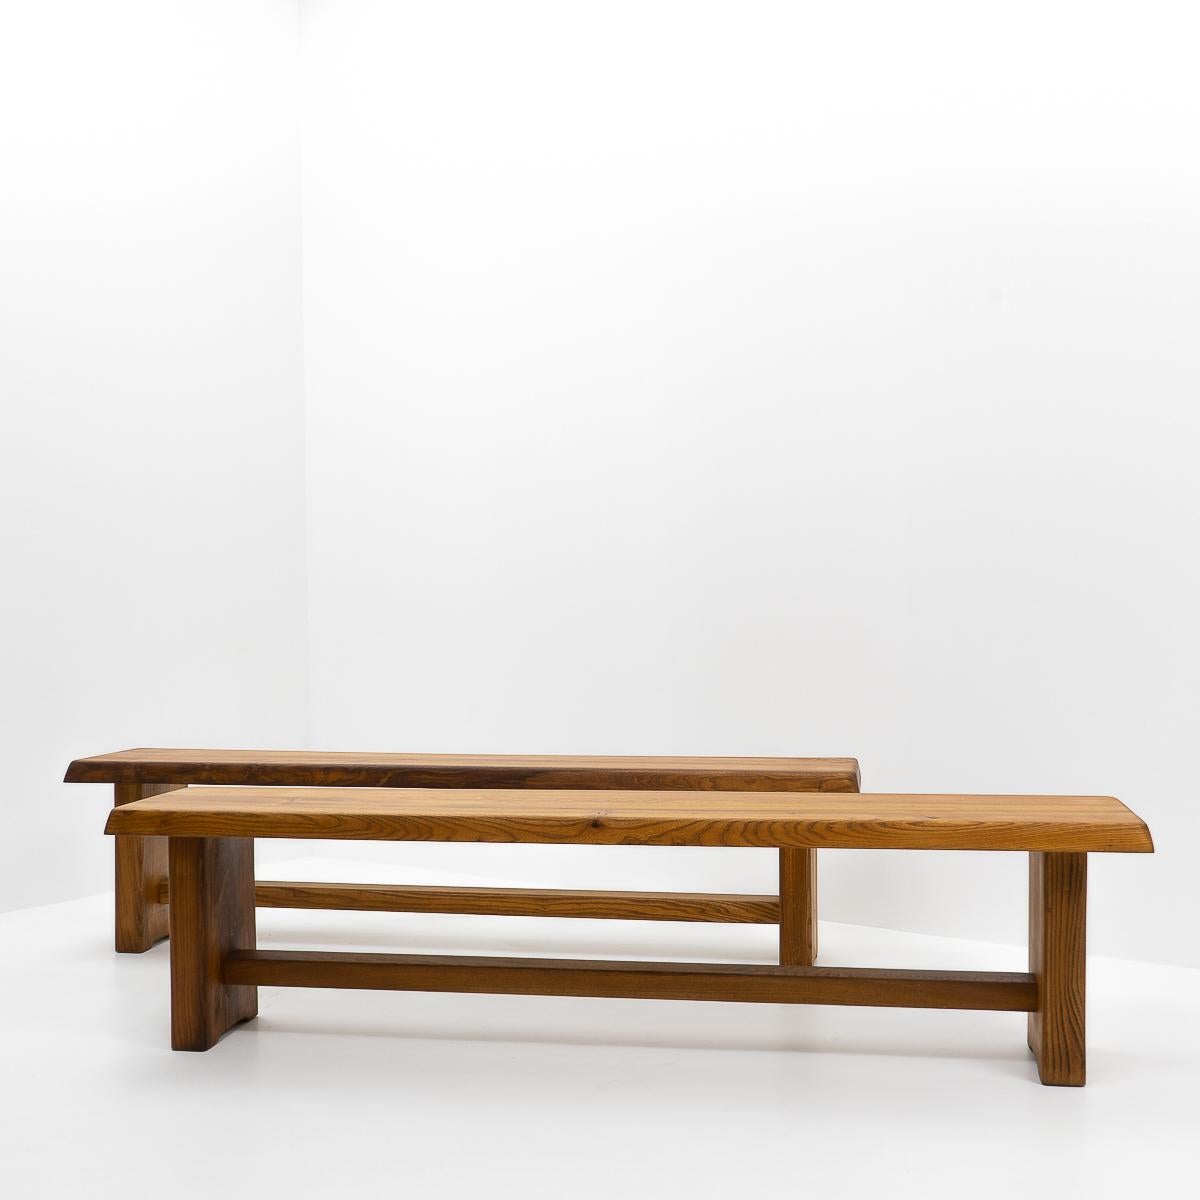 Late 20th Century French Design Classic: Pierre Chapo, S14 Benches, 1980s For Sale